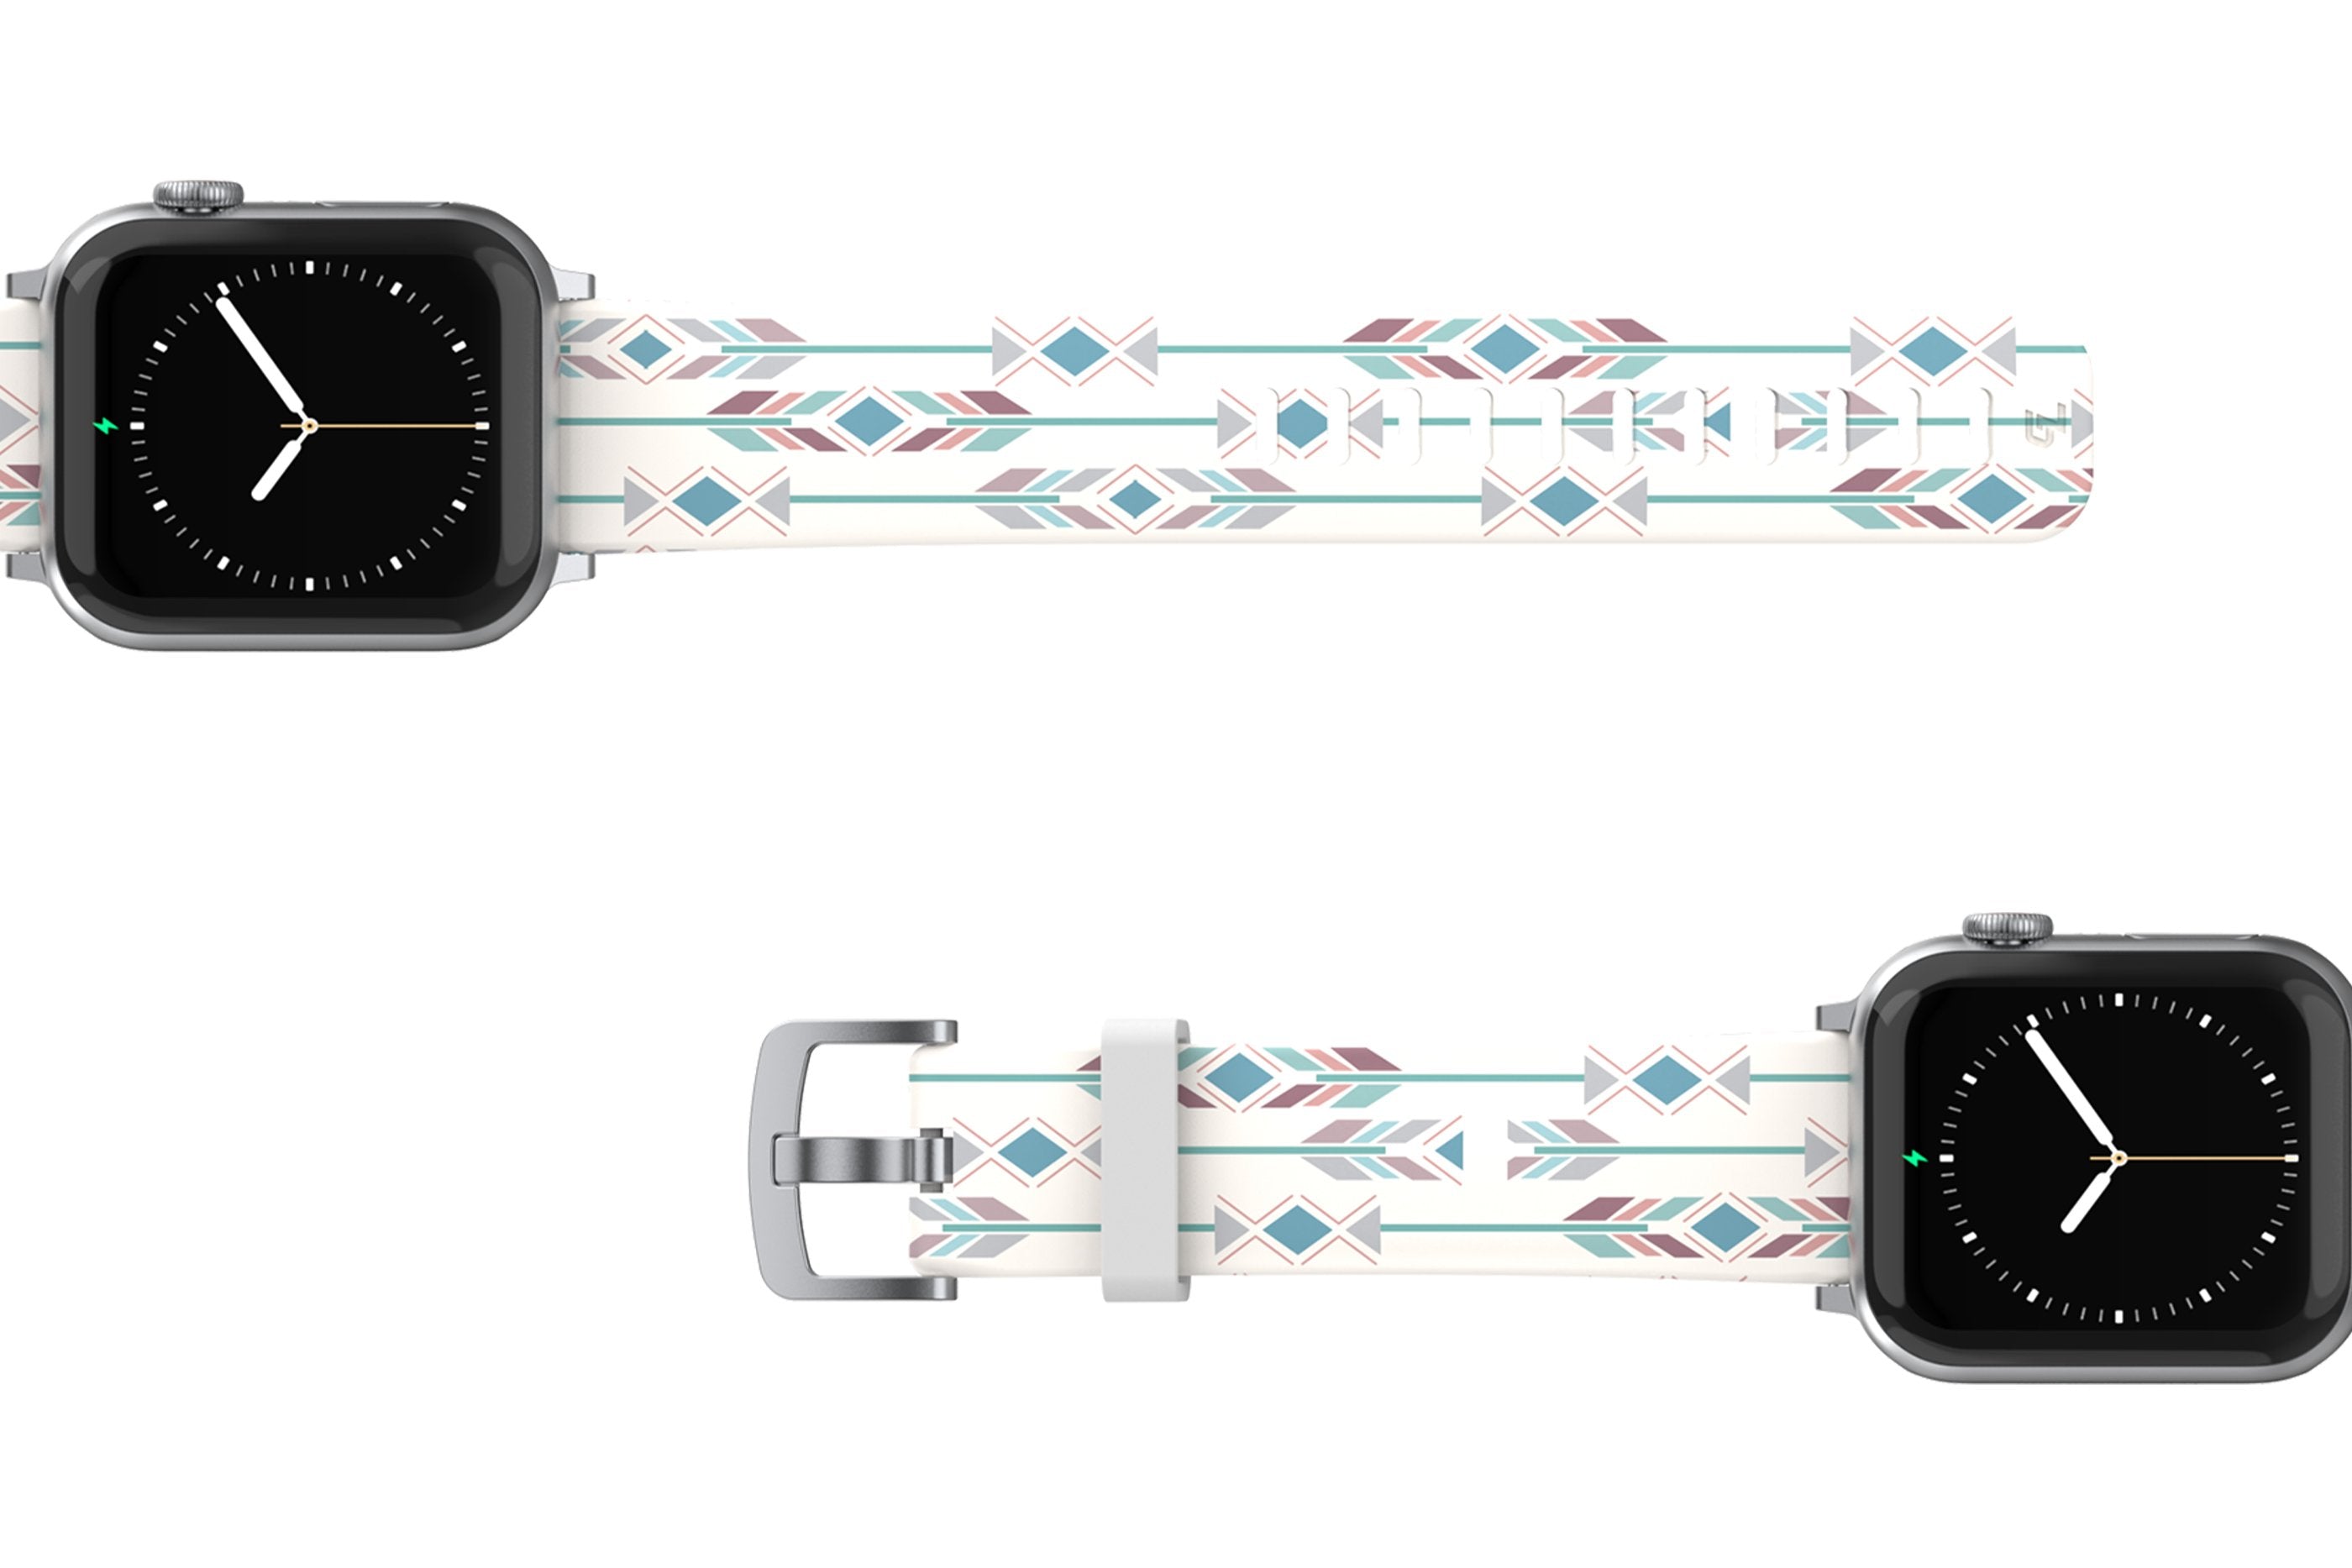 Wanderlust - Apple watch band with silver hardware viewed top down 